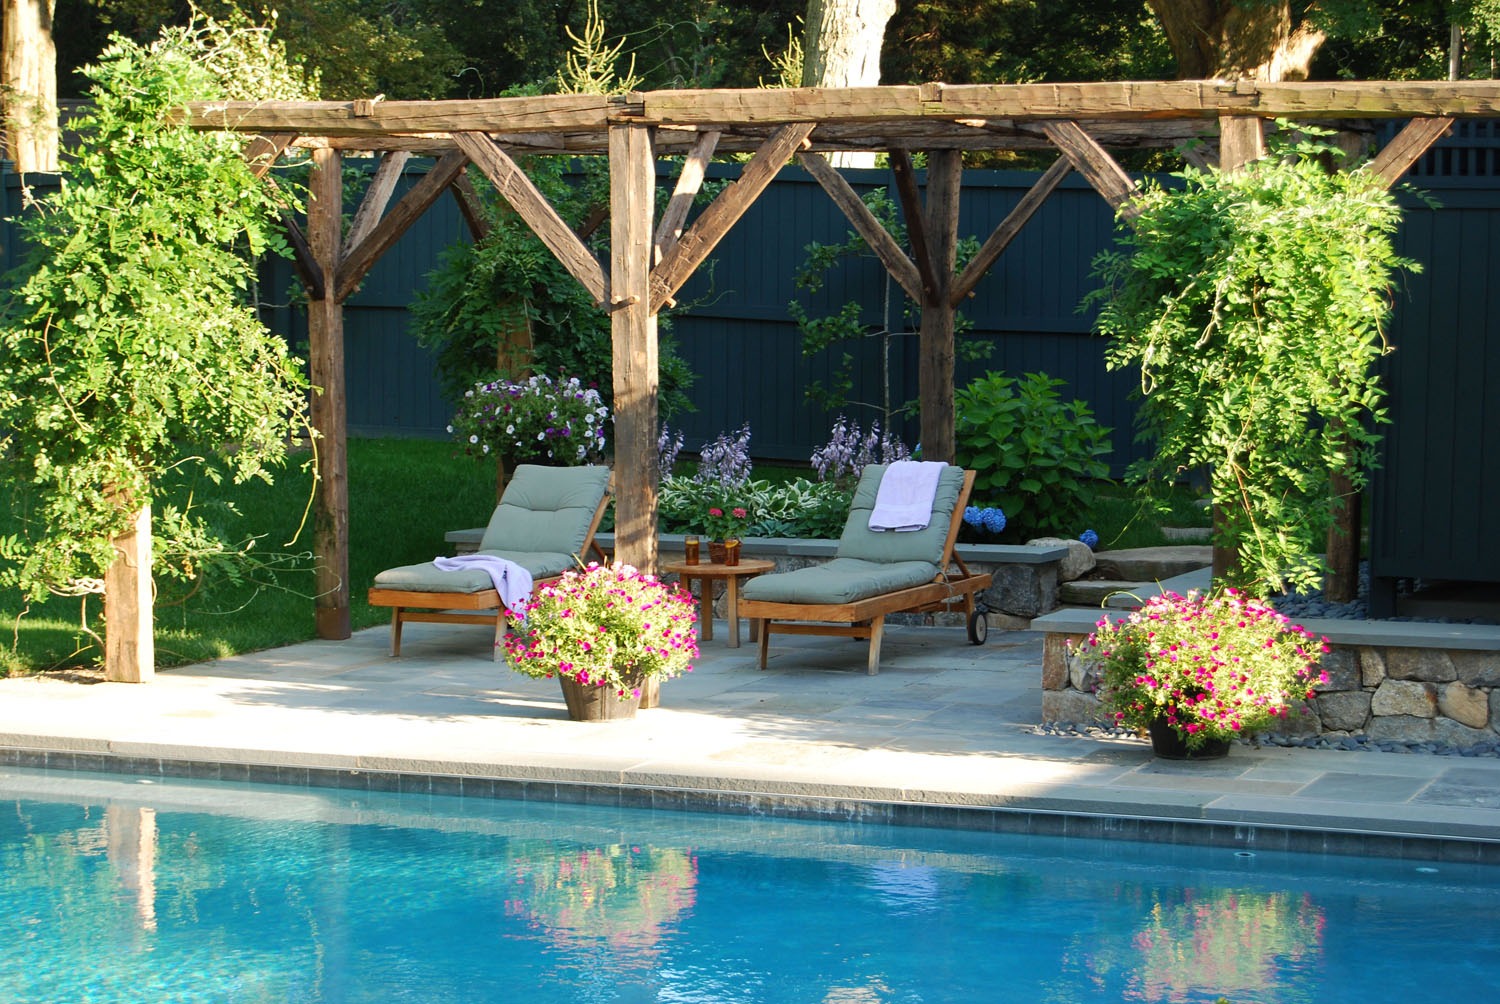 A serene backyard with a swimming pool, wooden sun loungers, vibrant flowers, and a pergola. The setting conveys leisure and tranquility, surrounded by greenery.